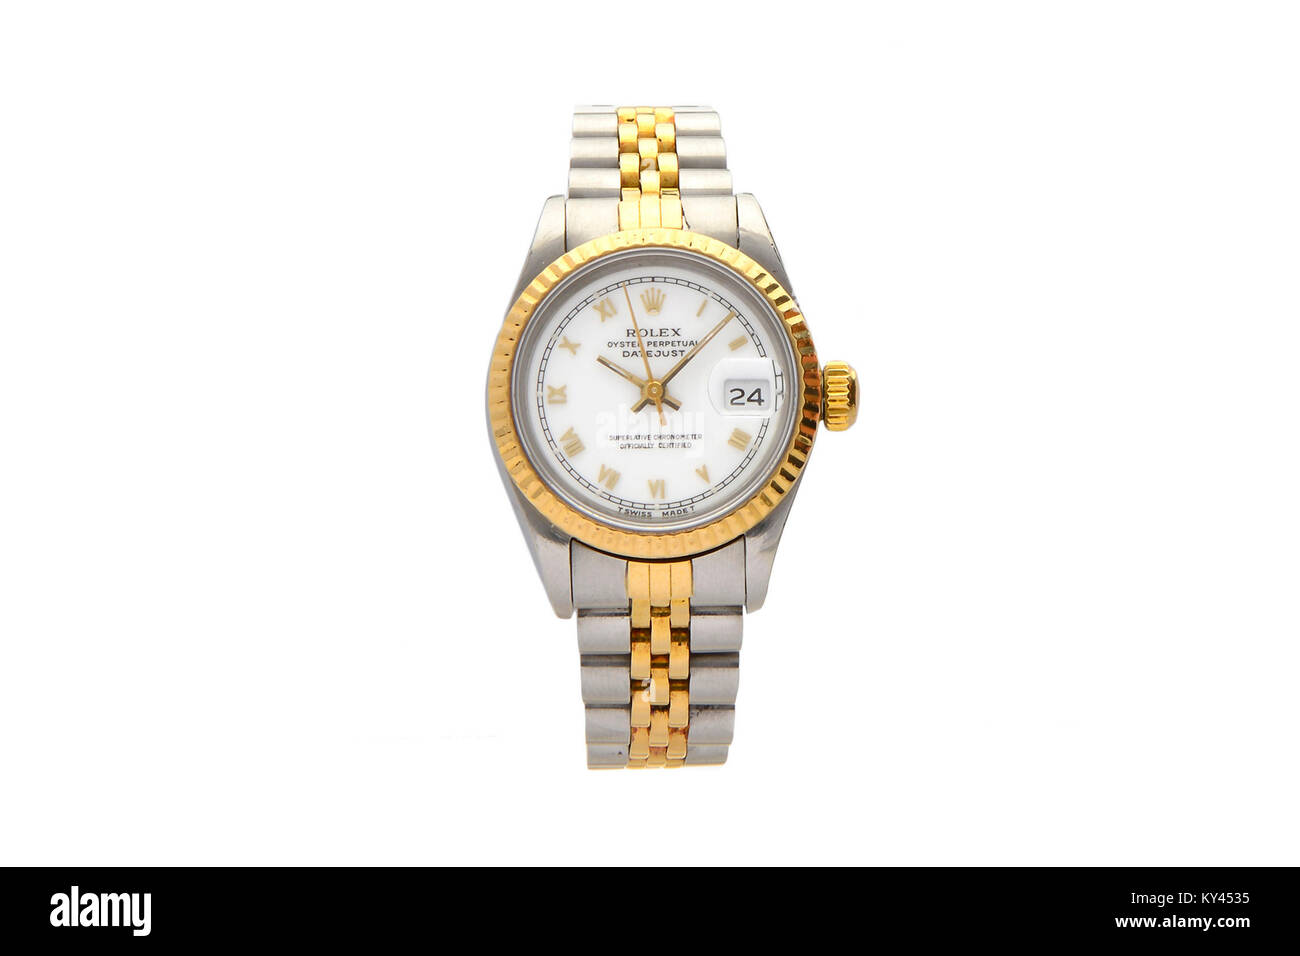 Rolex Oyster stainless steel and gold men's watch with white face Stock Photo